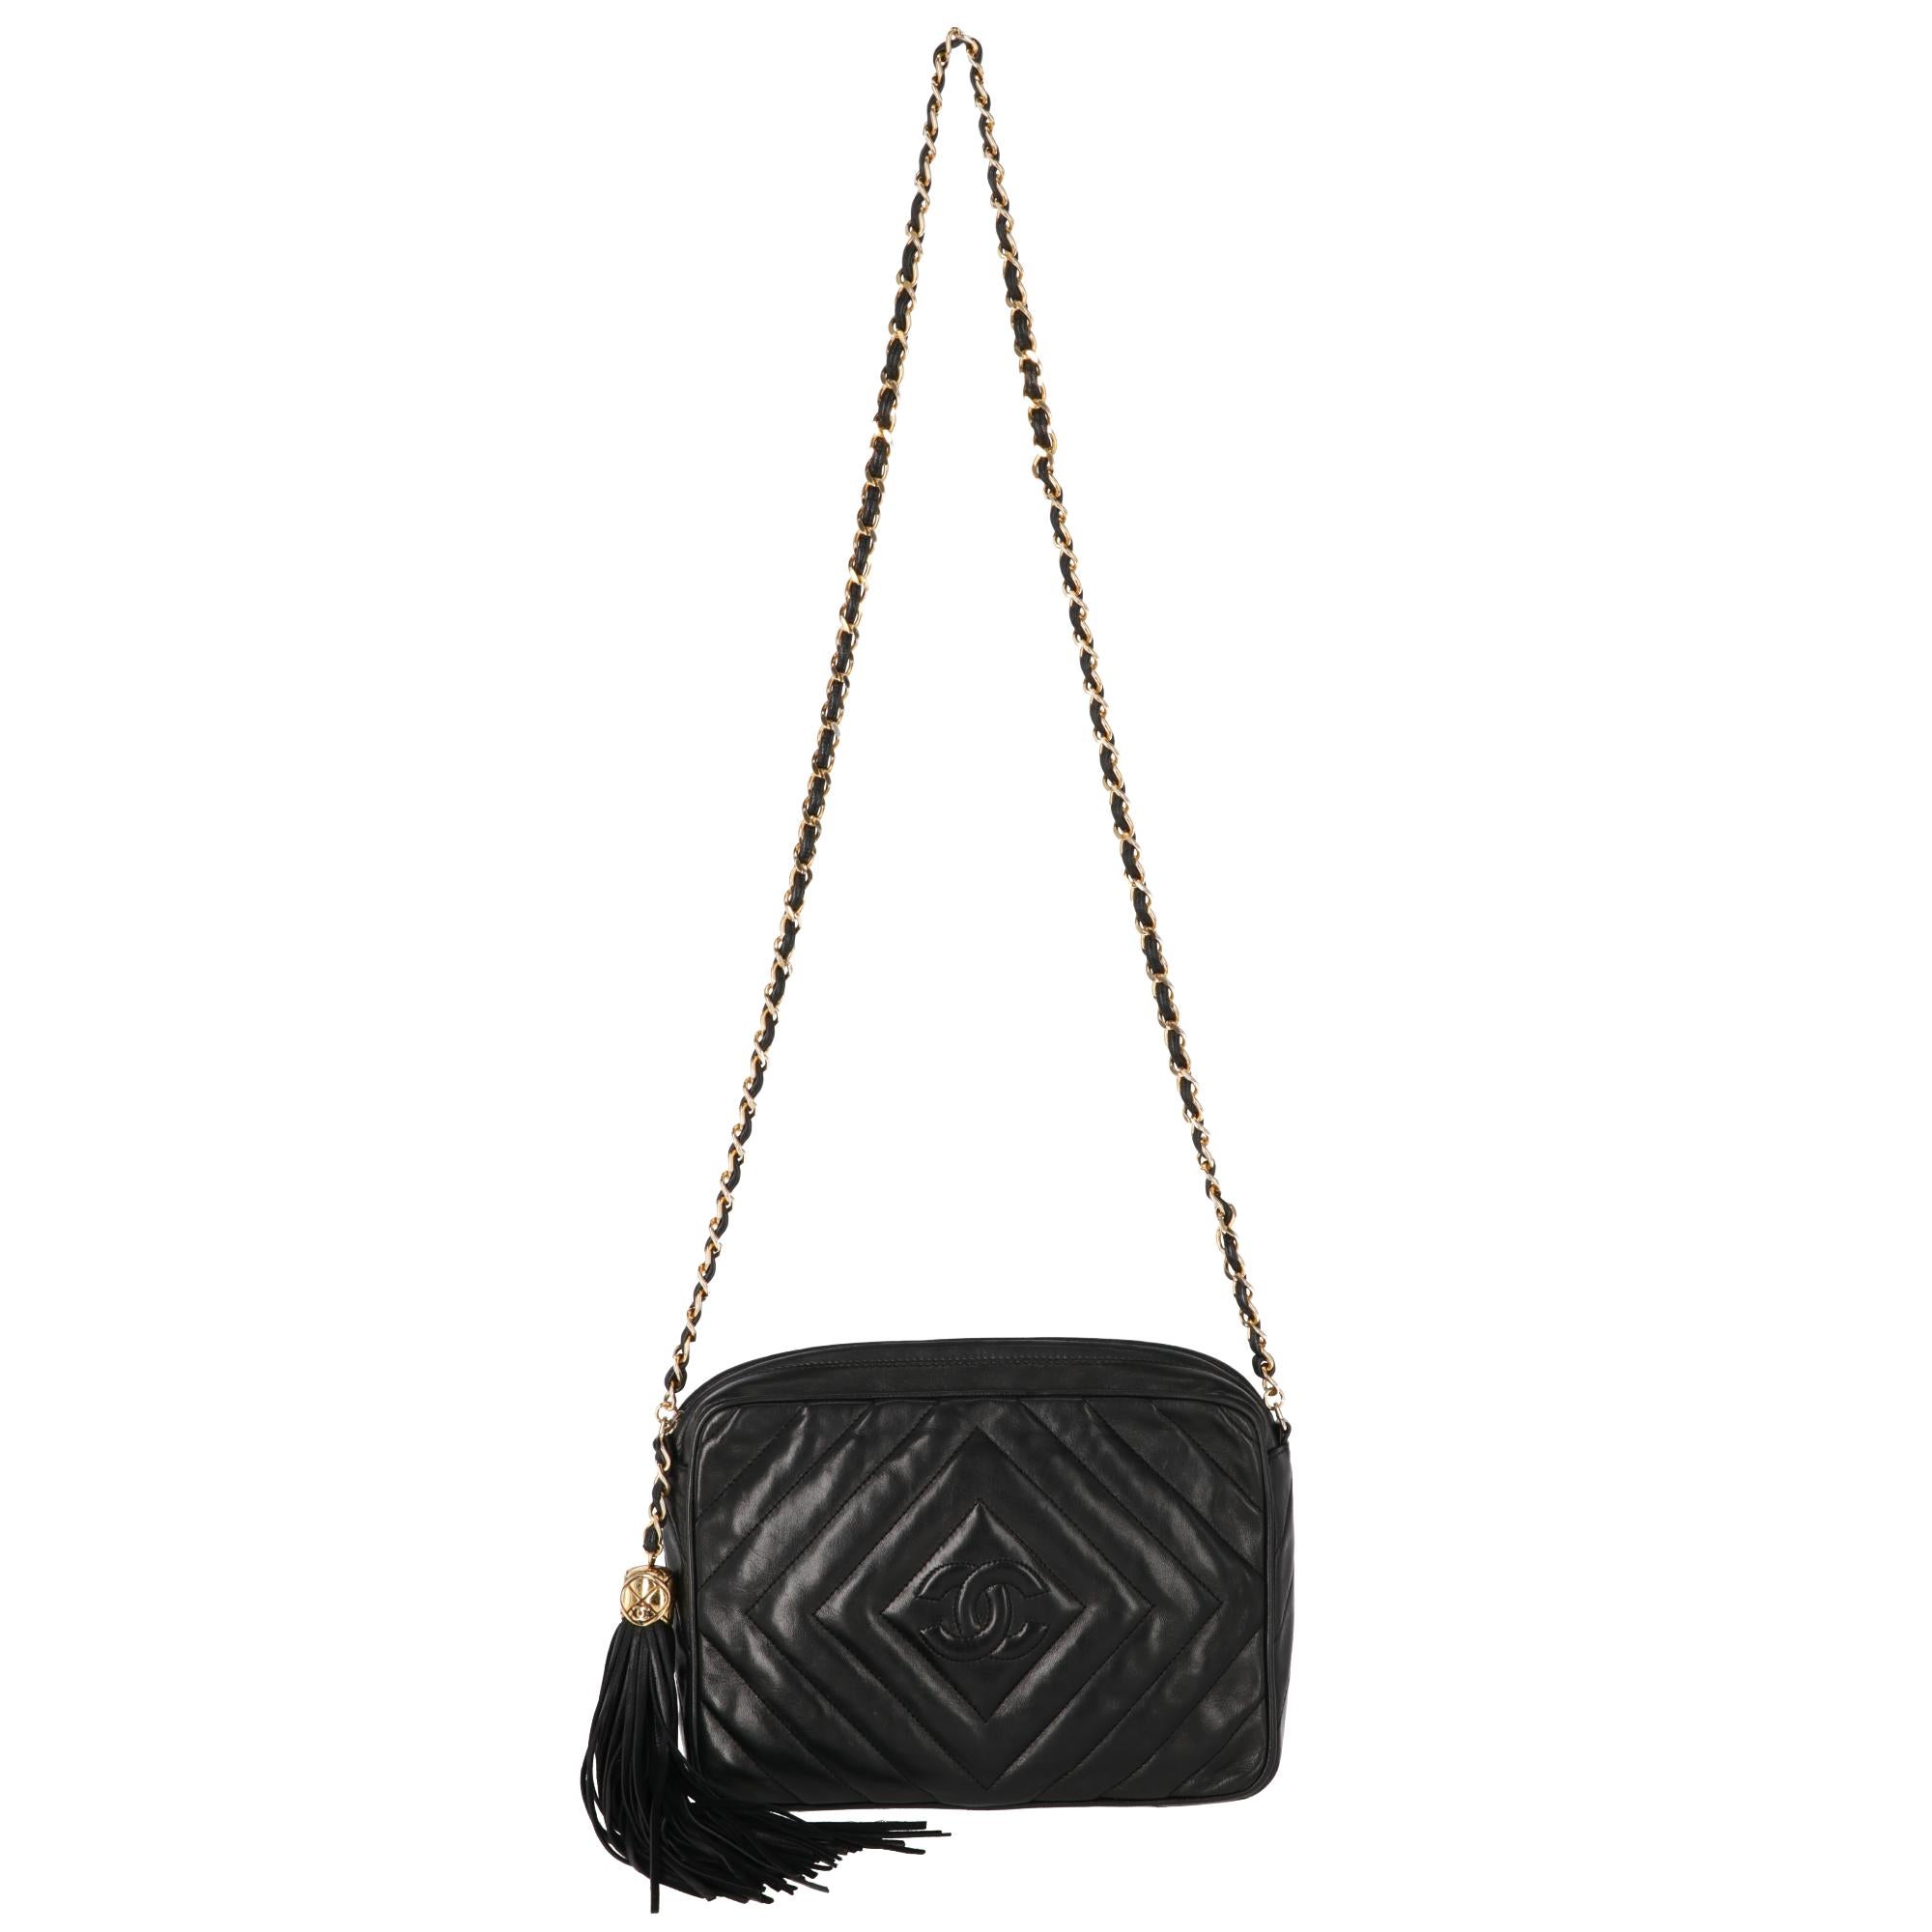 Chanel original black soft lamb leather shoulder bag with gold-tone chain and interlaced brown leather shoulder bag, matelassé with front quilted logo, one inner zipped pocket, decorative tassel pendant with gold tone metal logo detail and black